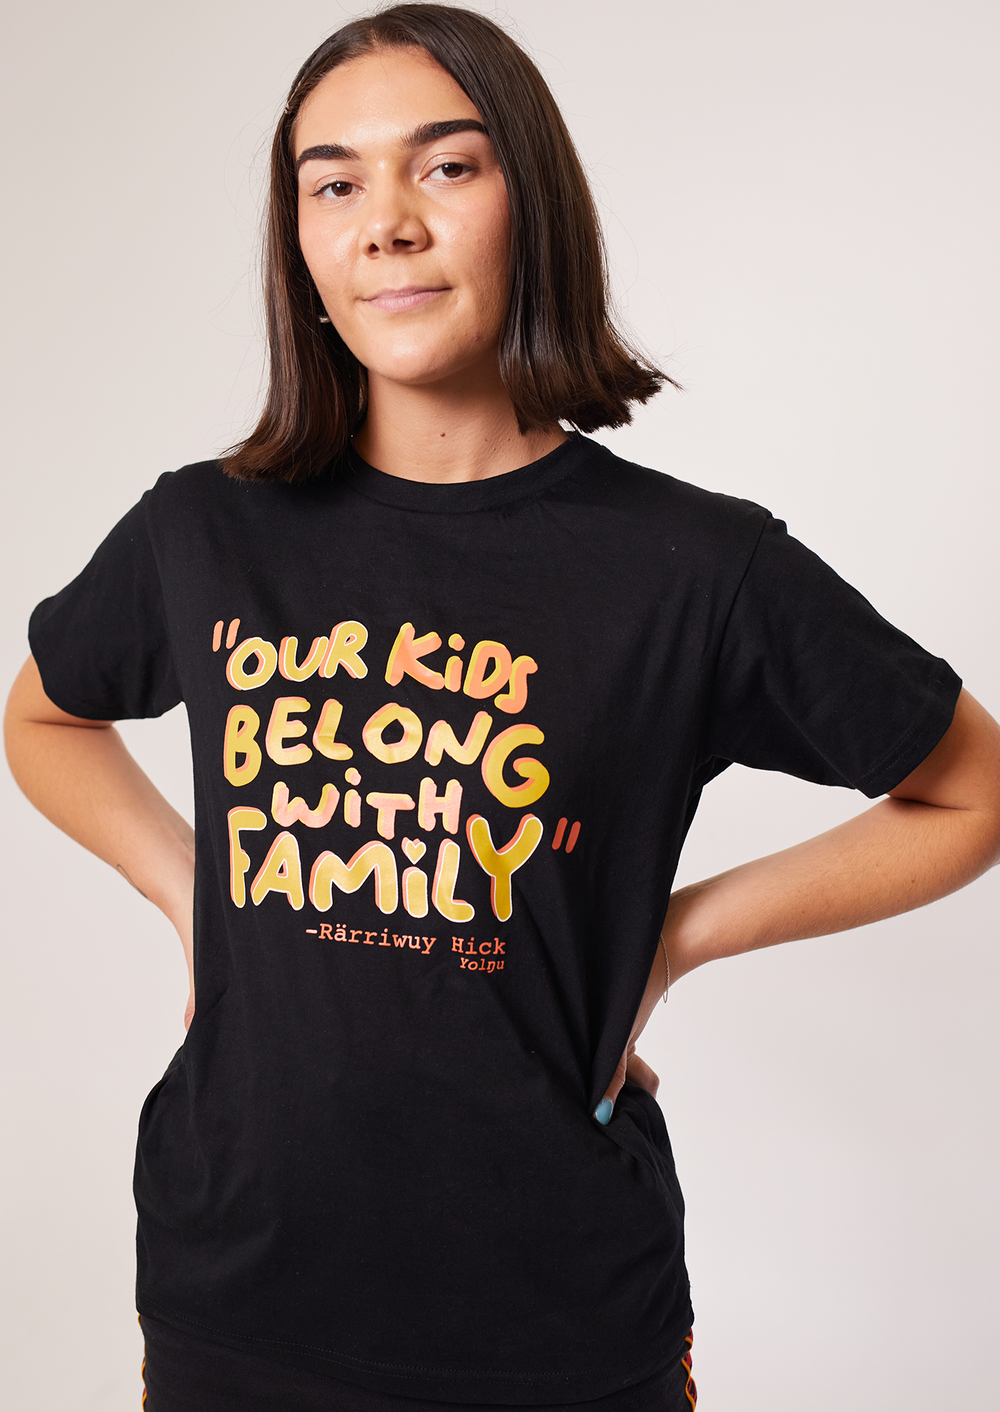 Clothing The Gaps. Our Kids Belong with Family Tee. Black T-shirt with the quote “Our kids belong with family” Rarriwuy Hick Big on front chest of t-shirt in yellow orange text.